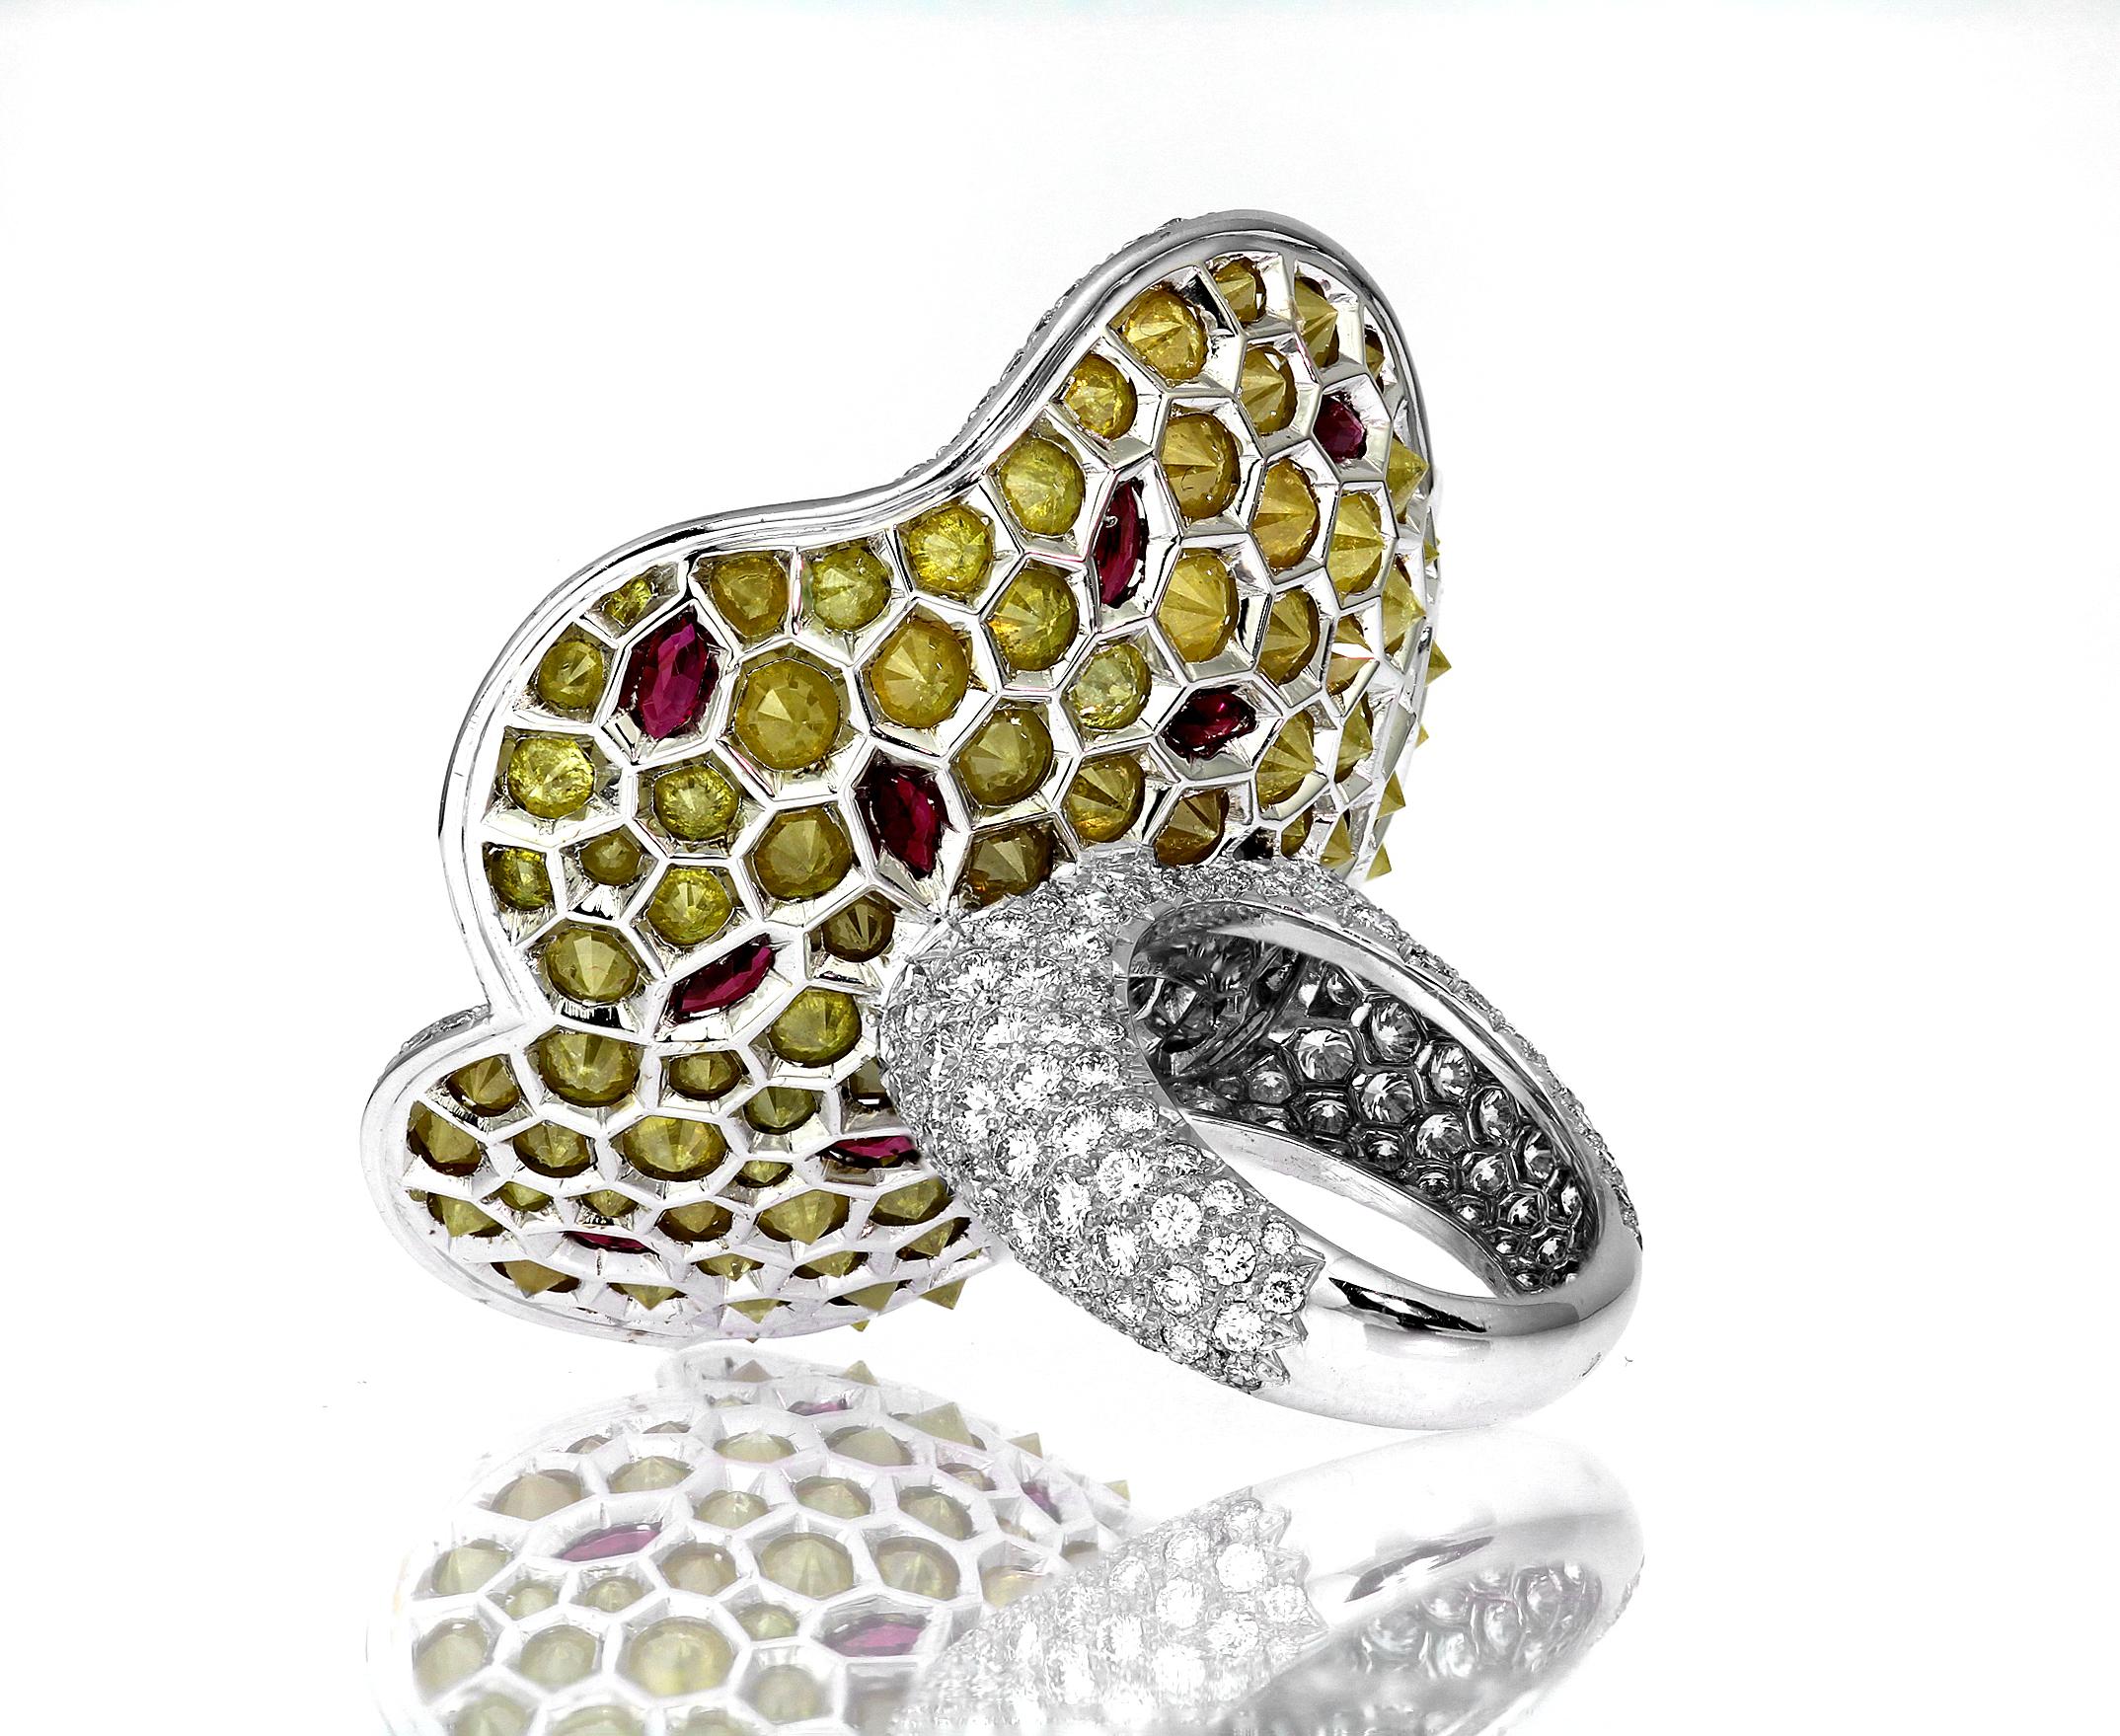 Designer De Grisogono Big Floral Cocktail Ring with Ruby, Yellow & White Diamond 1